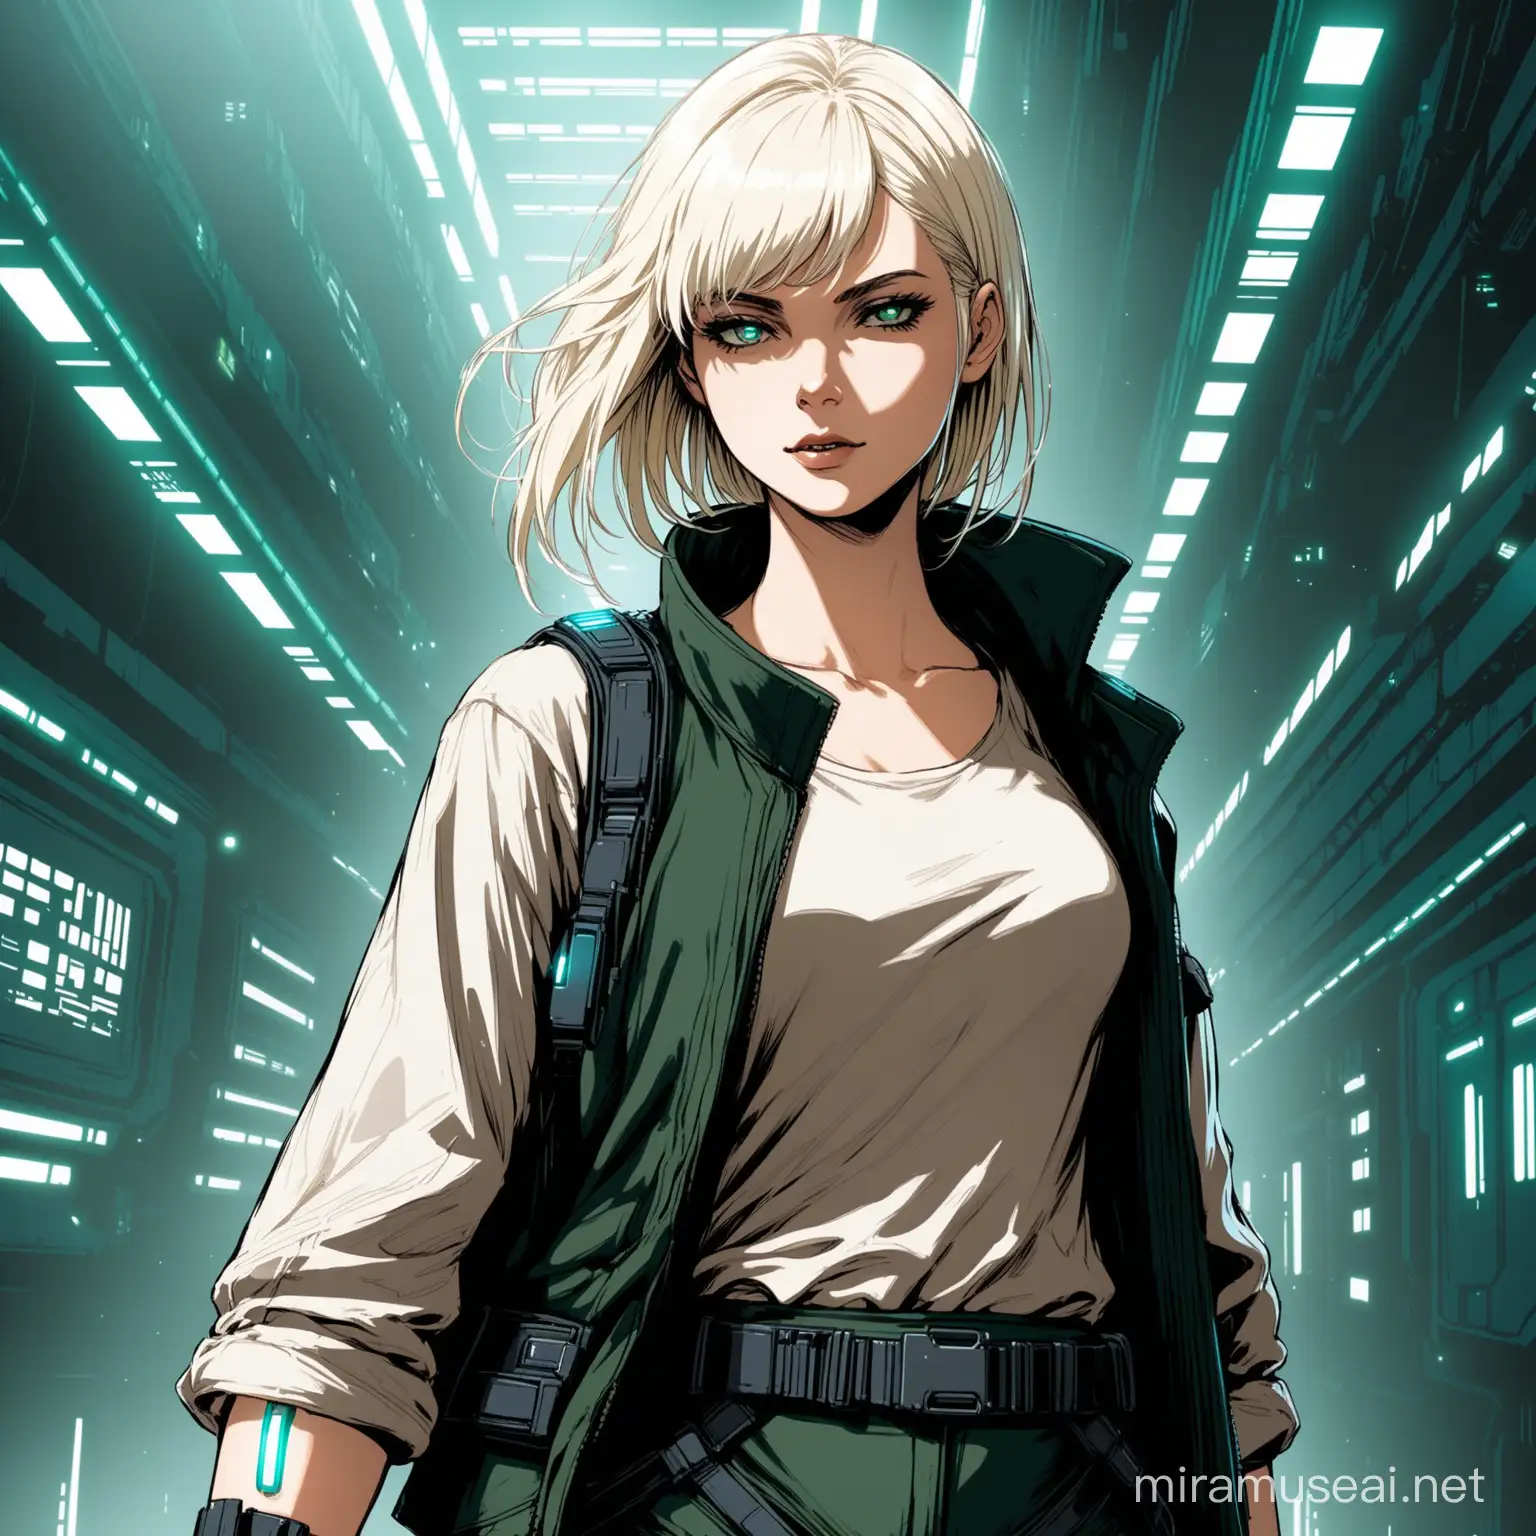 create a bladerunner replicant. she has blond lone white hair. . she wears civilian clothes
